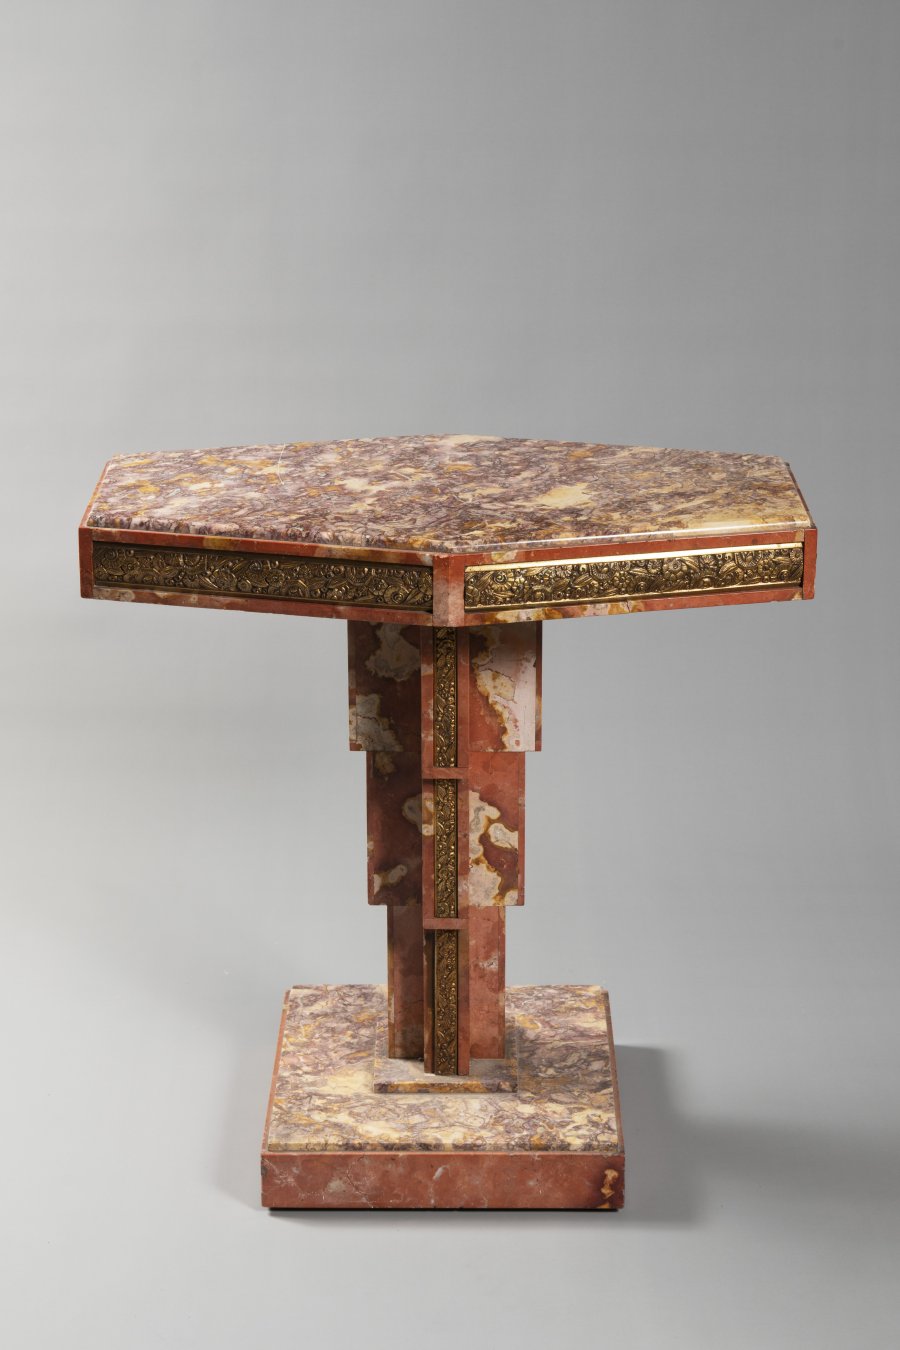 A MARBLE ART DECO SIDE TABLE